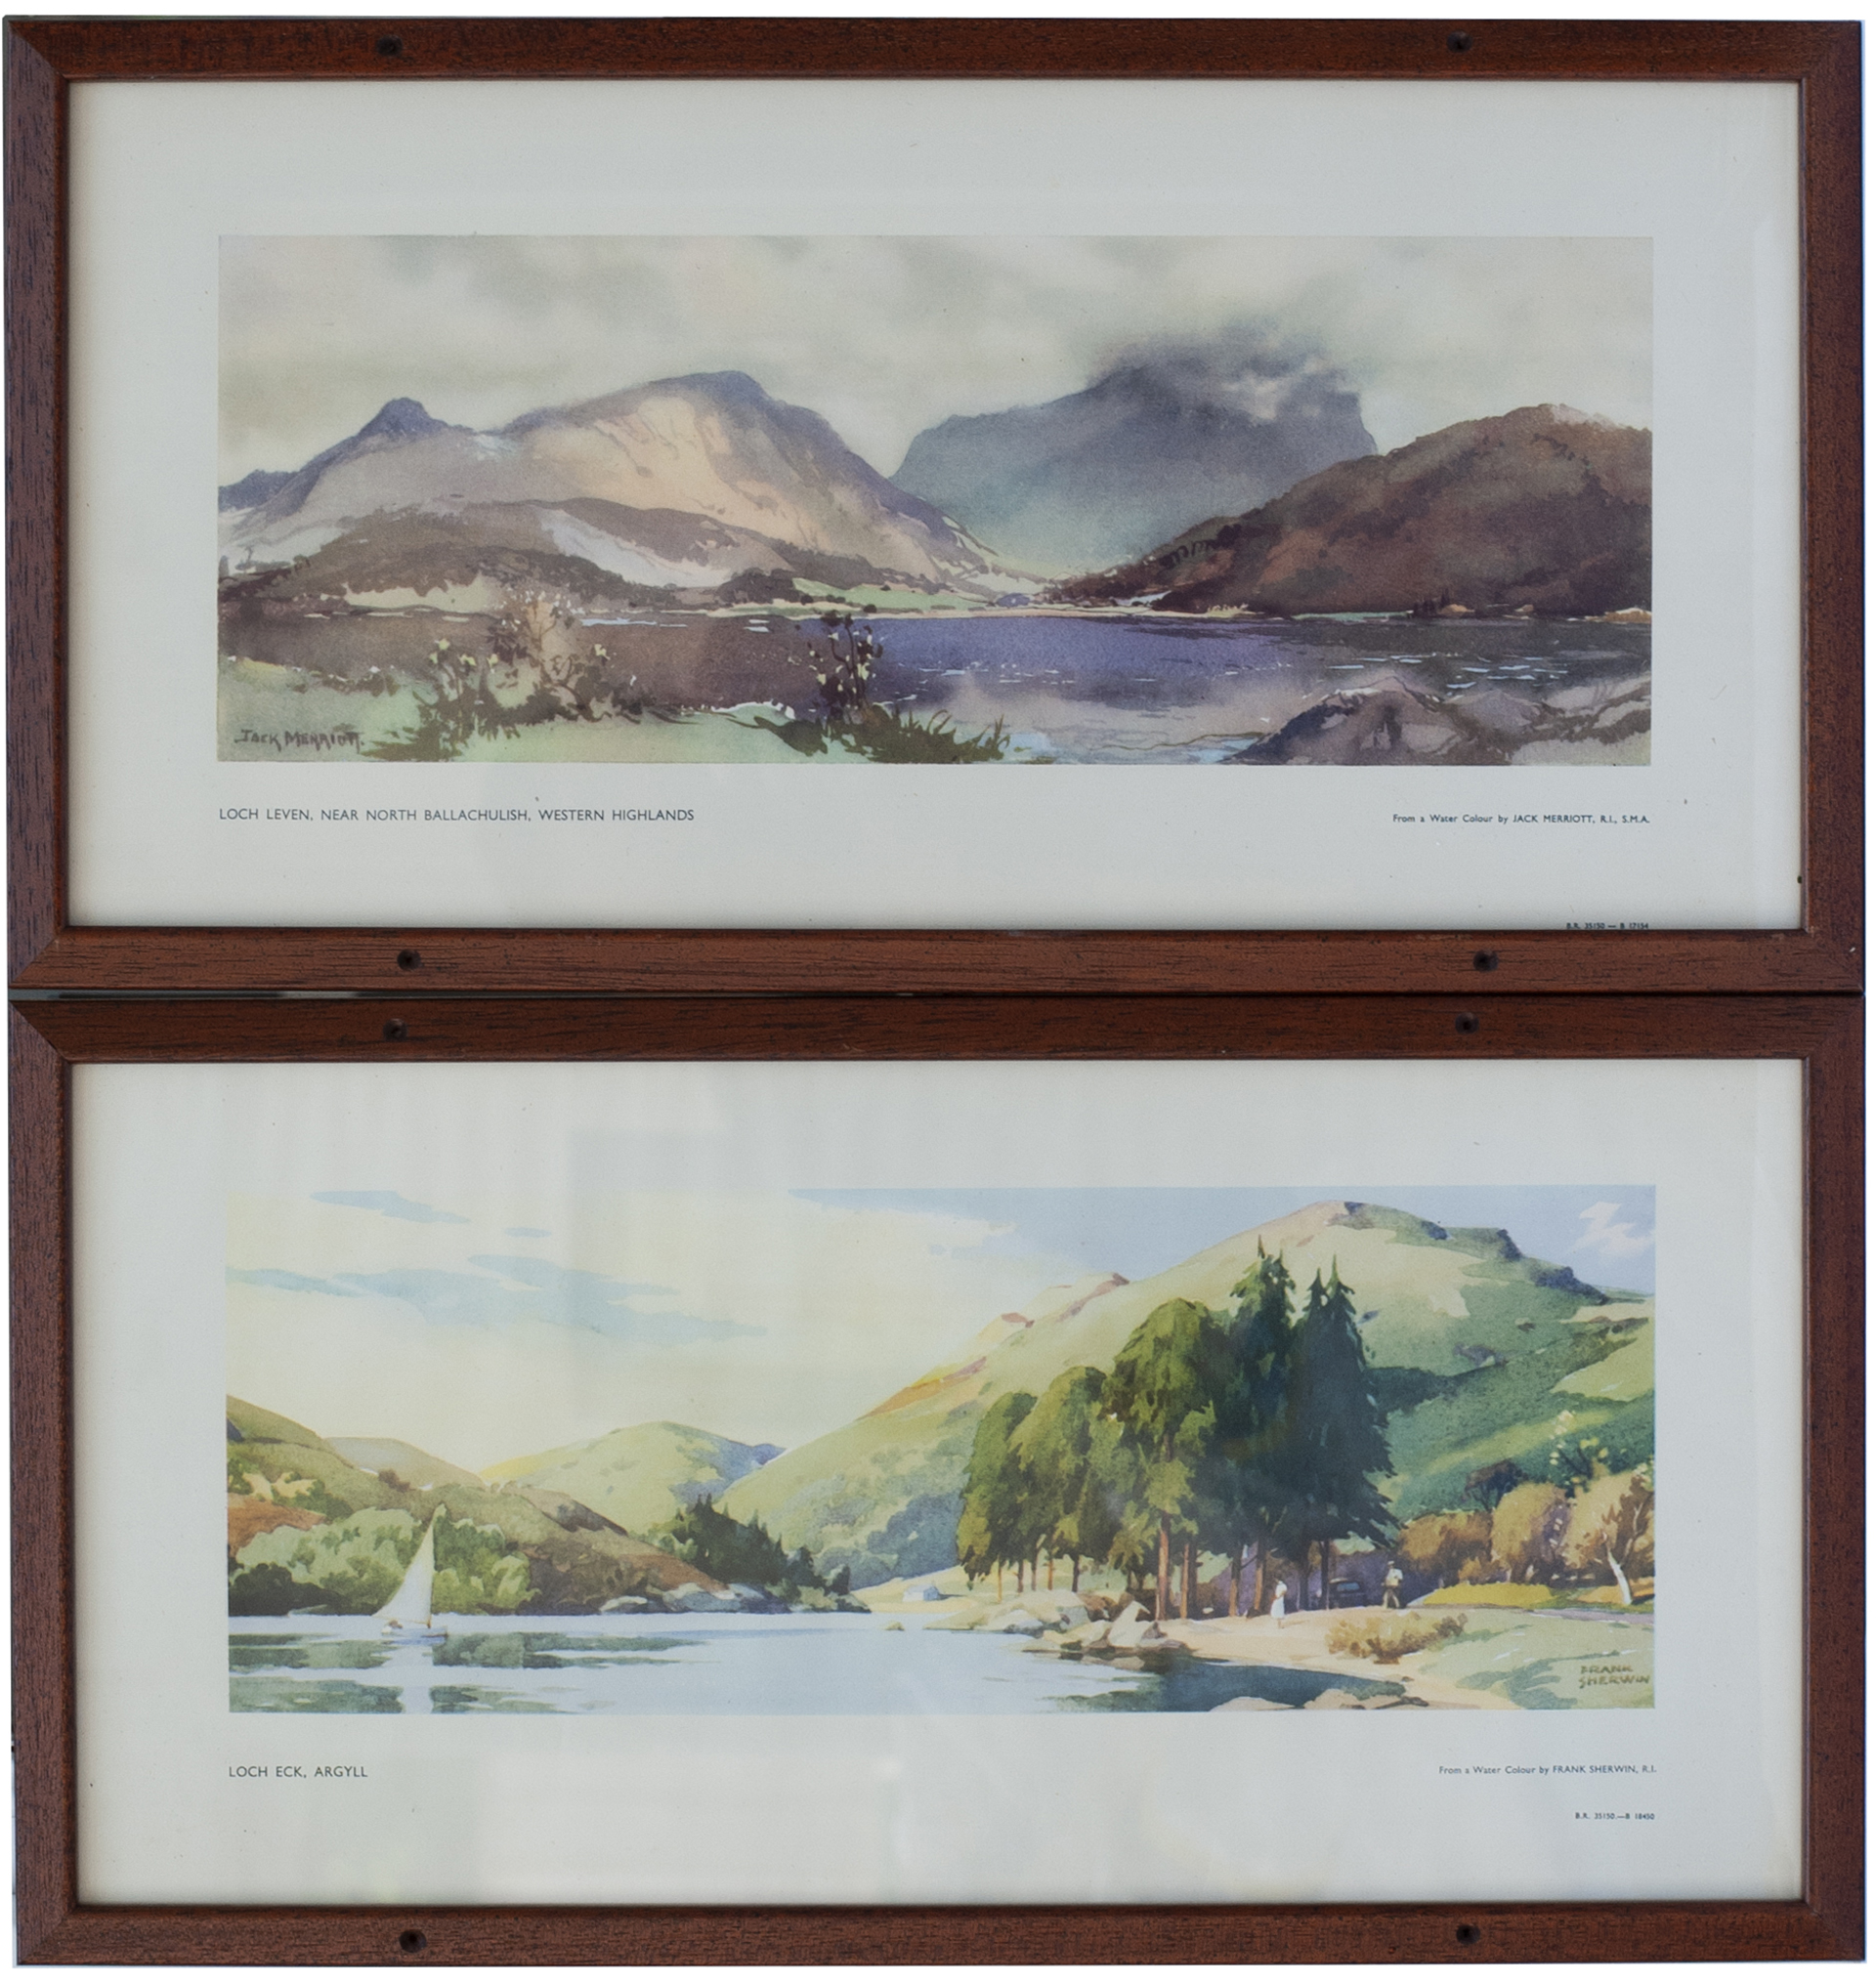 Carriage Prints x 2 LOCH ECK, ARGYLL by Frank Sherwin R.I. and LOCH LEVEN, NR NORTH BALLACHULISH,